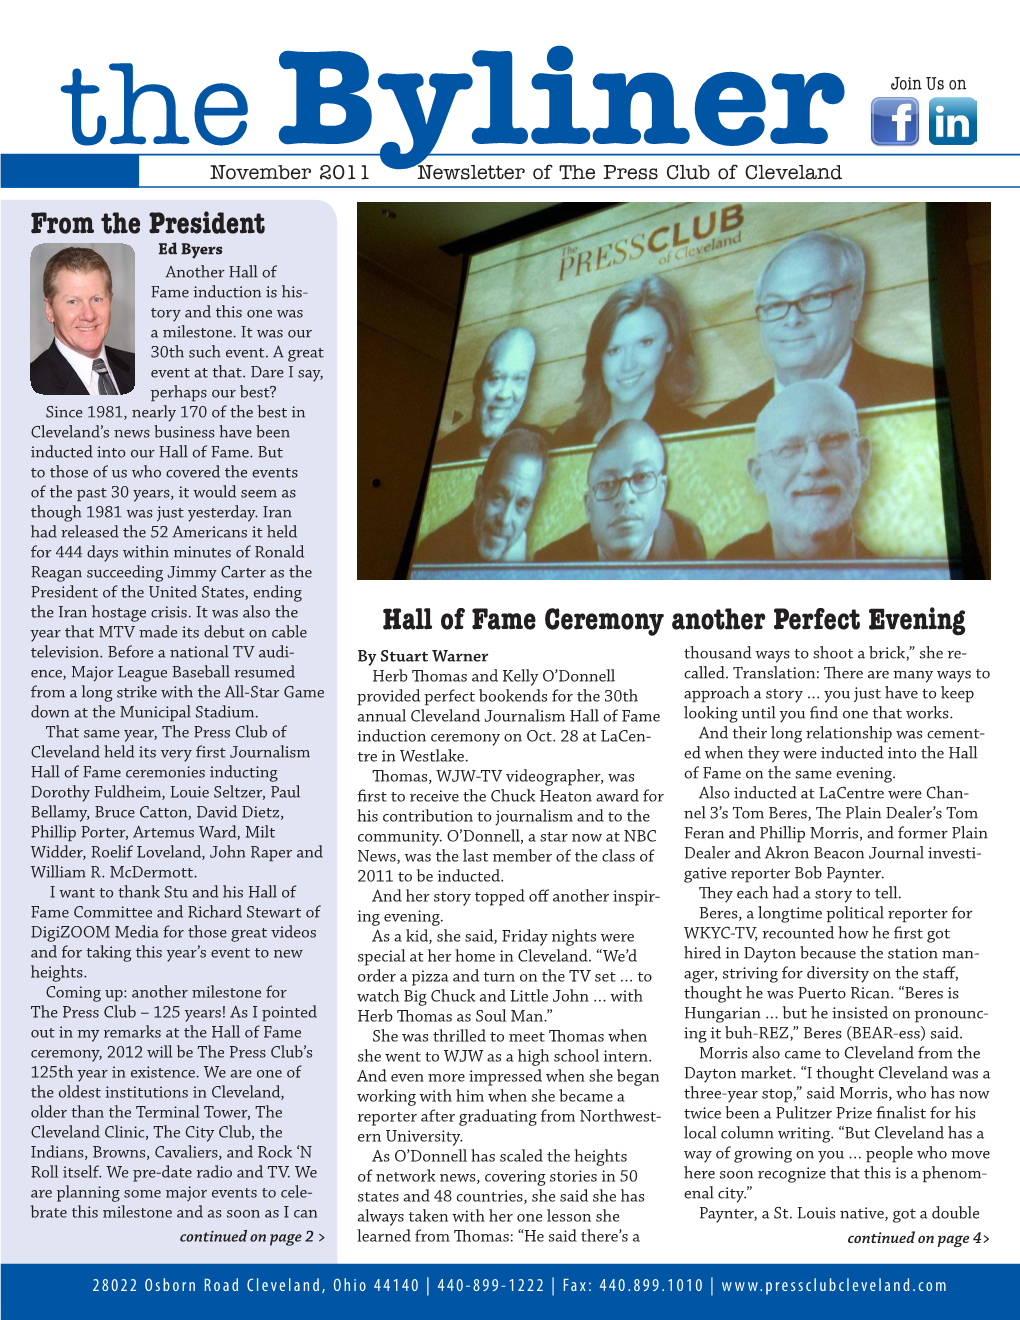 November 2011 Newsletter of the Press Club of Cleveland from the President Ed Byers Another Hall of Fame Induction Is His- Tory and This One Was a Milestone